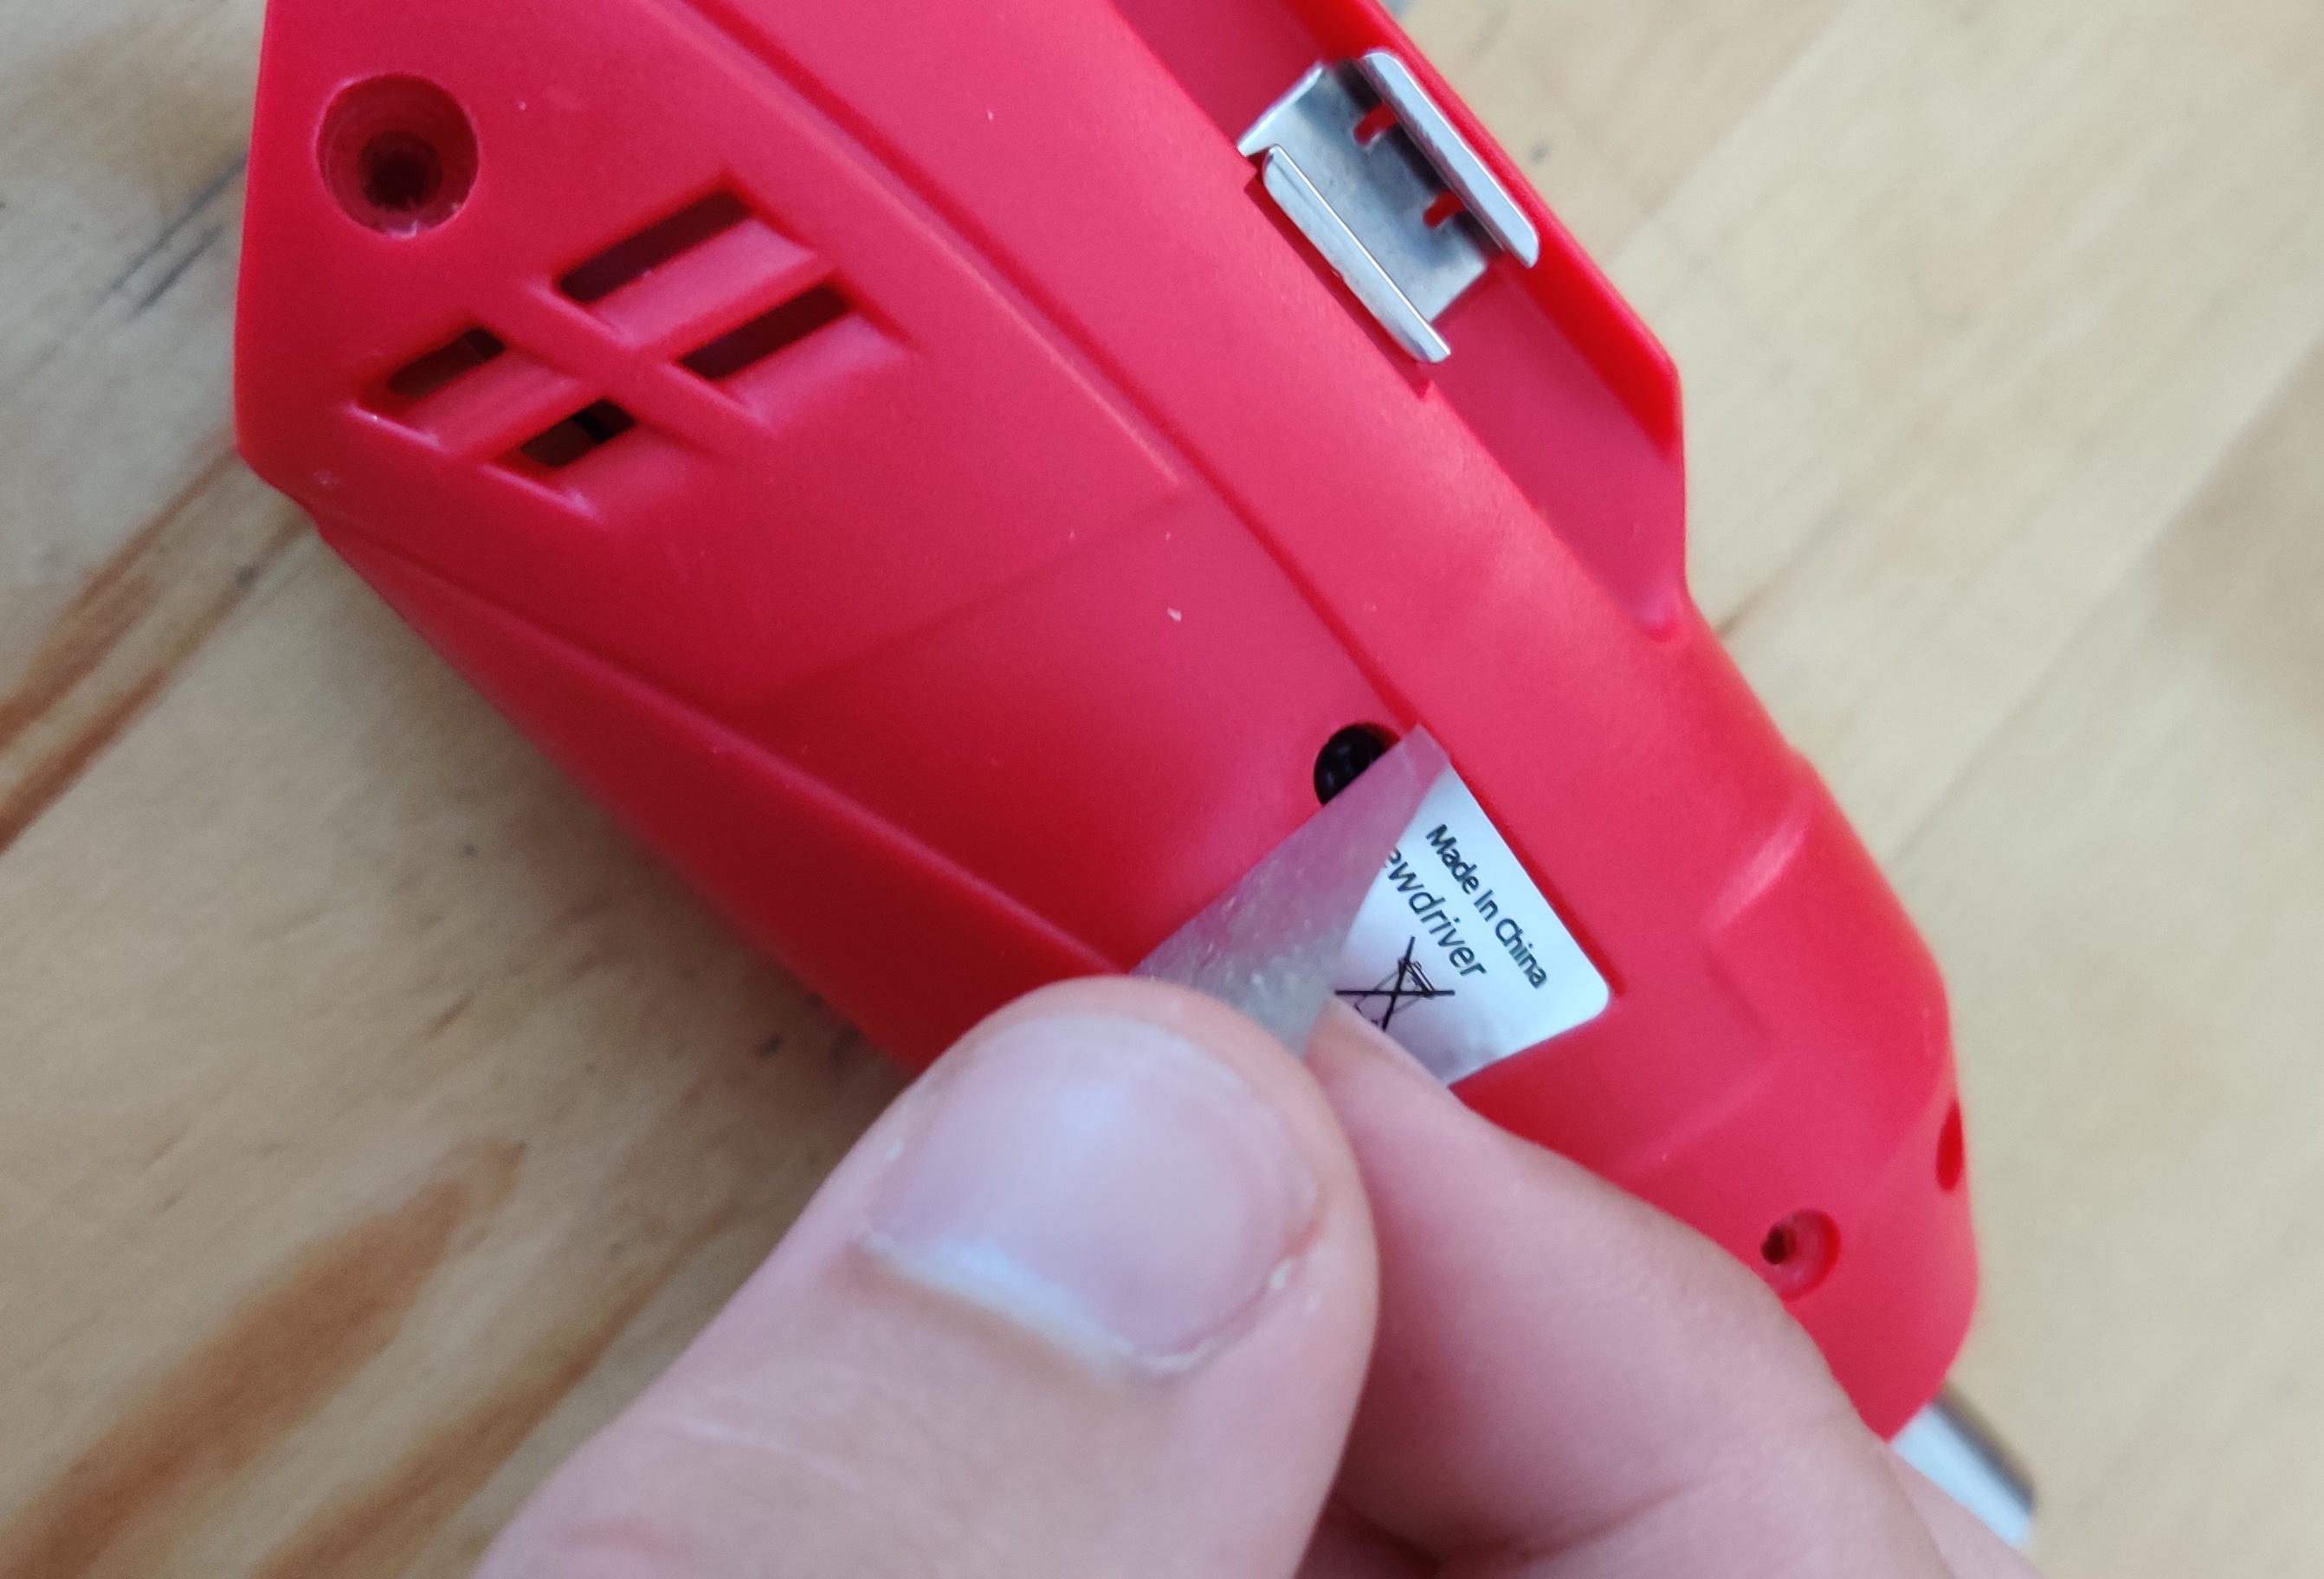 A screw hiding under a sticker on the cordless screwdriver